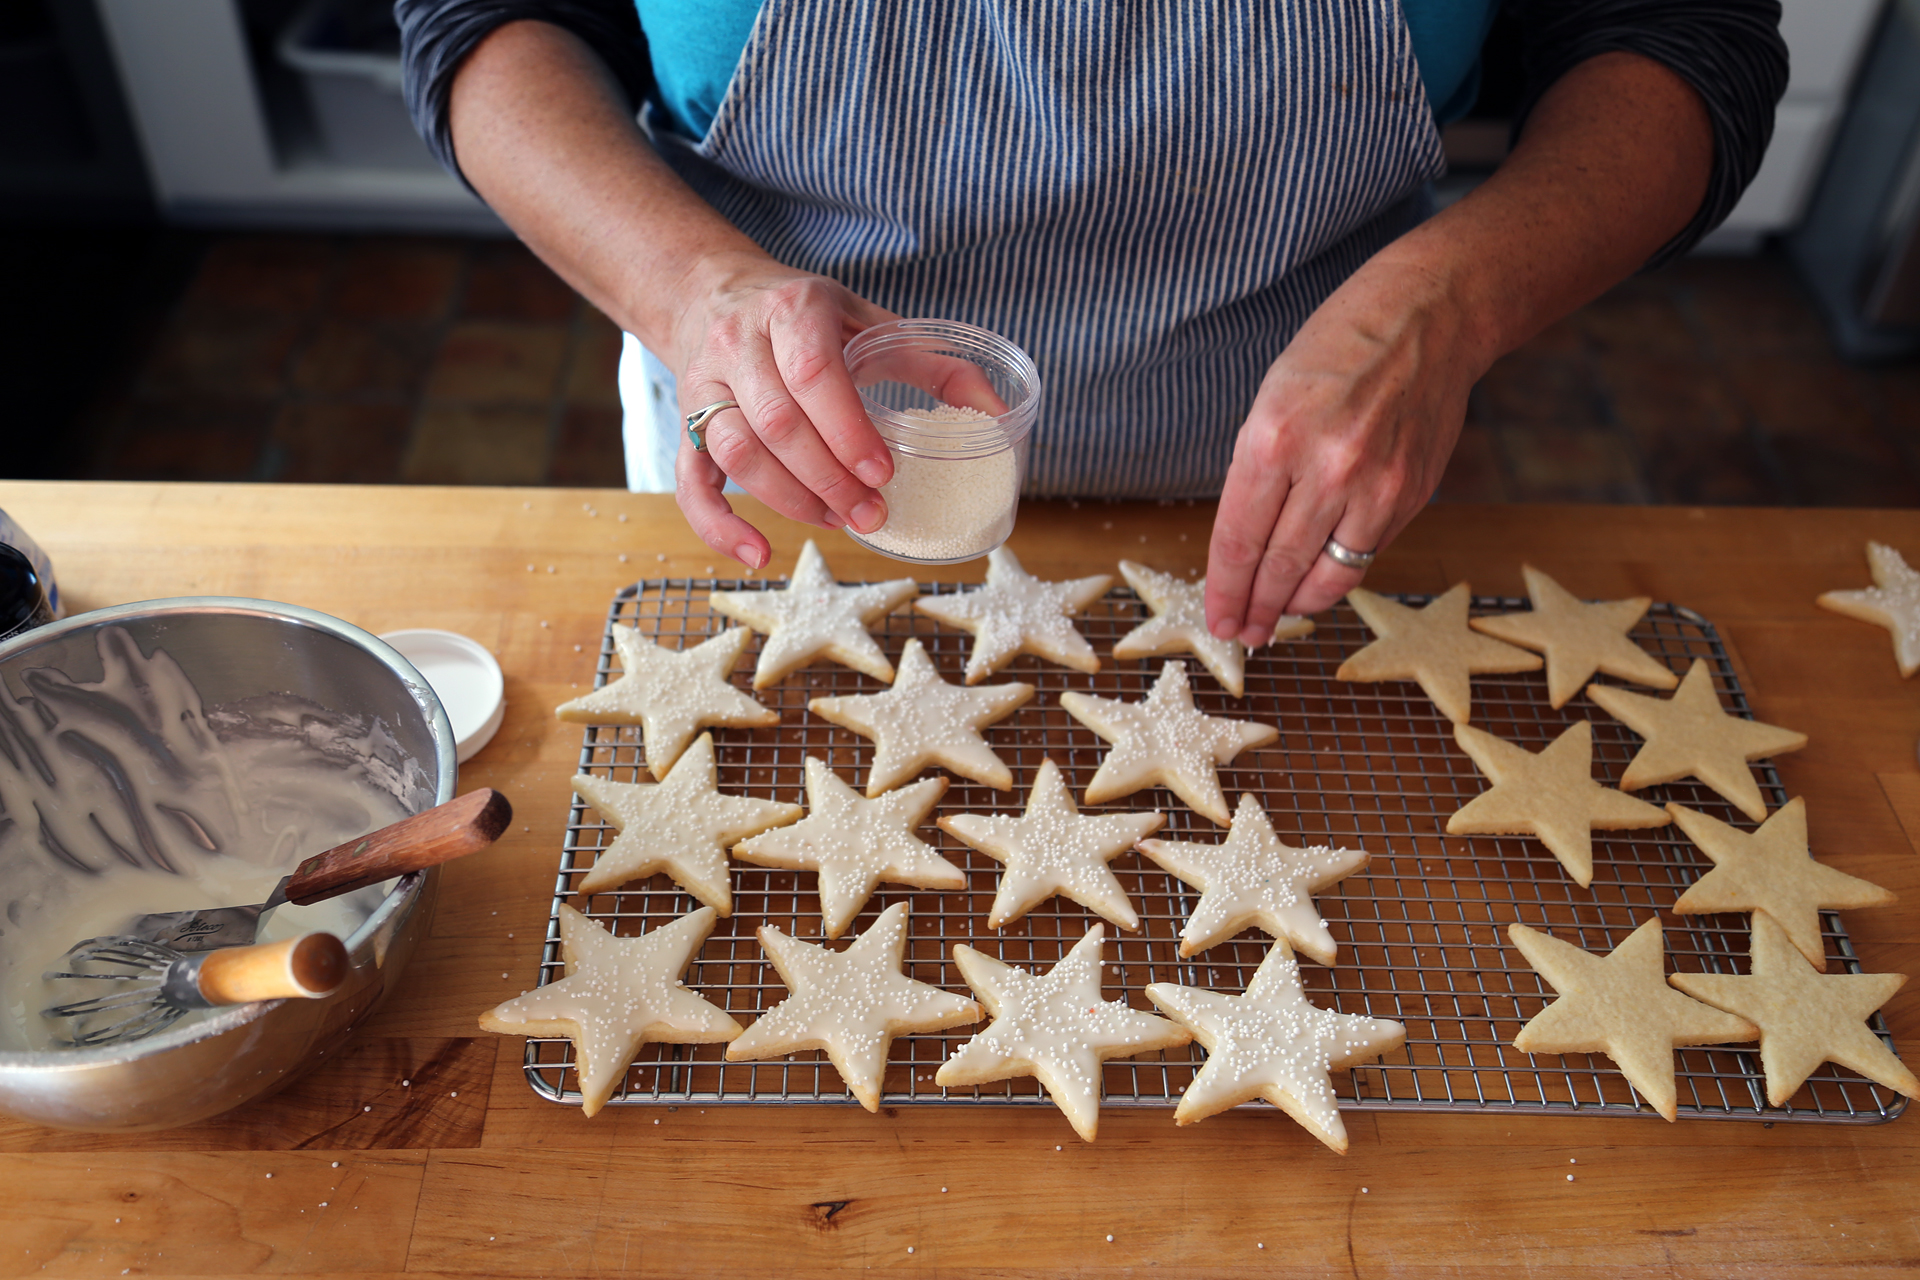 Sprinkle the star cookies with sparkle sugar for decoration and serve.